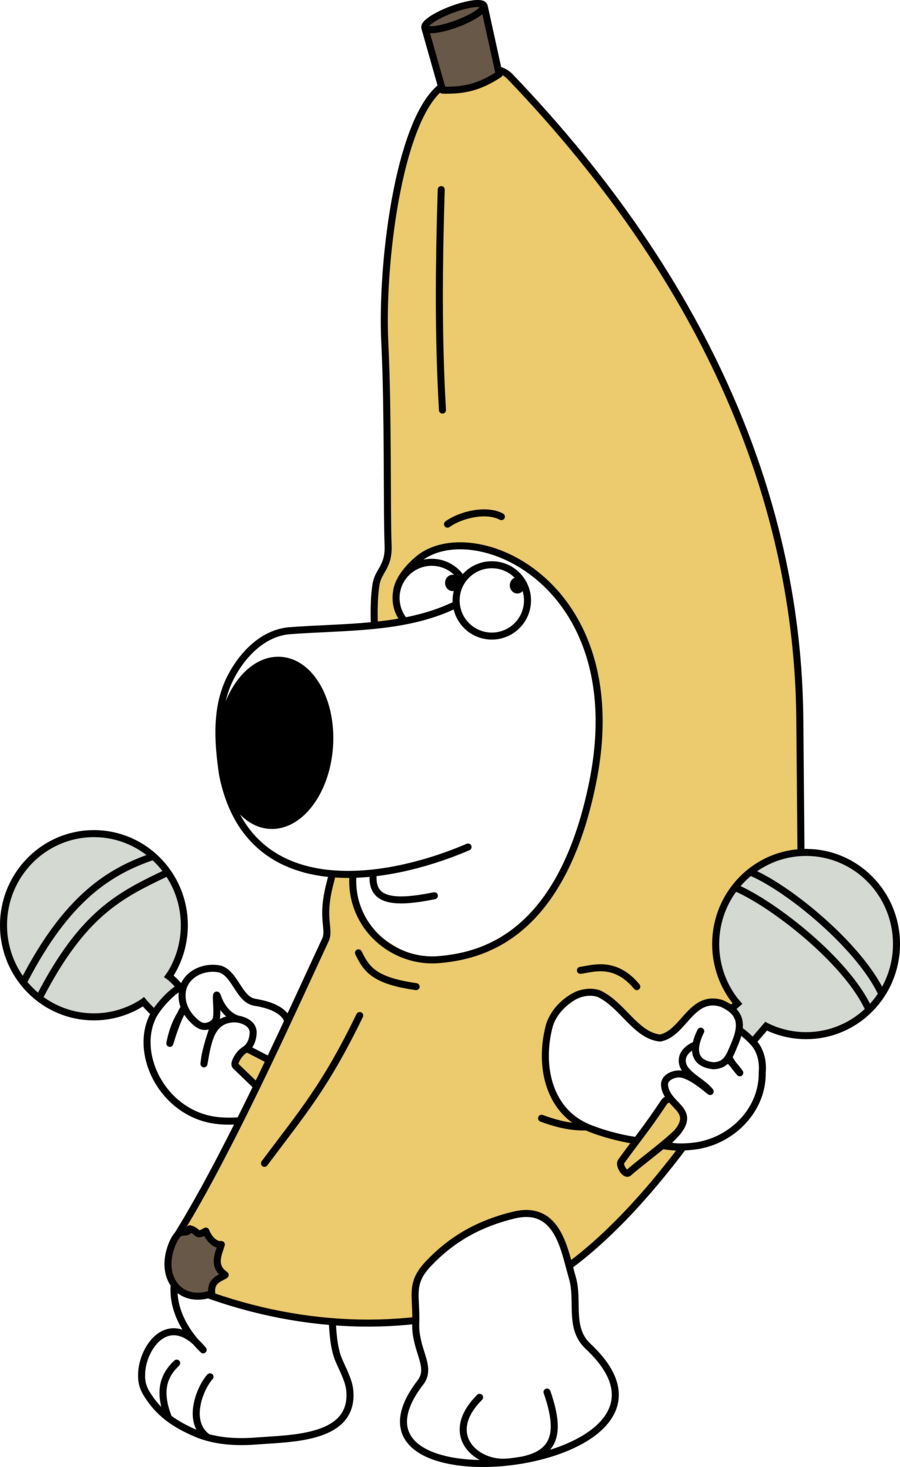 Peanut Butter Jelly Time By Ggrock70-d4fixty - Brian Griffin Peanut Butter Jelly Time (900x1467), Png Download